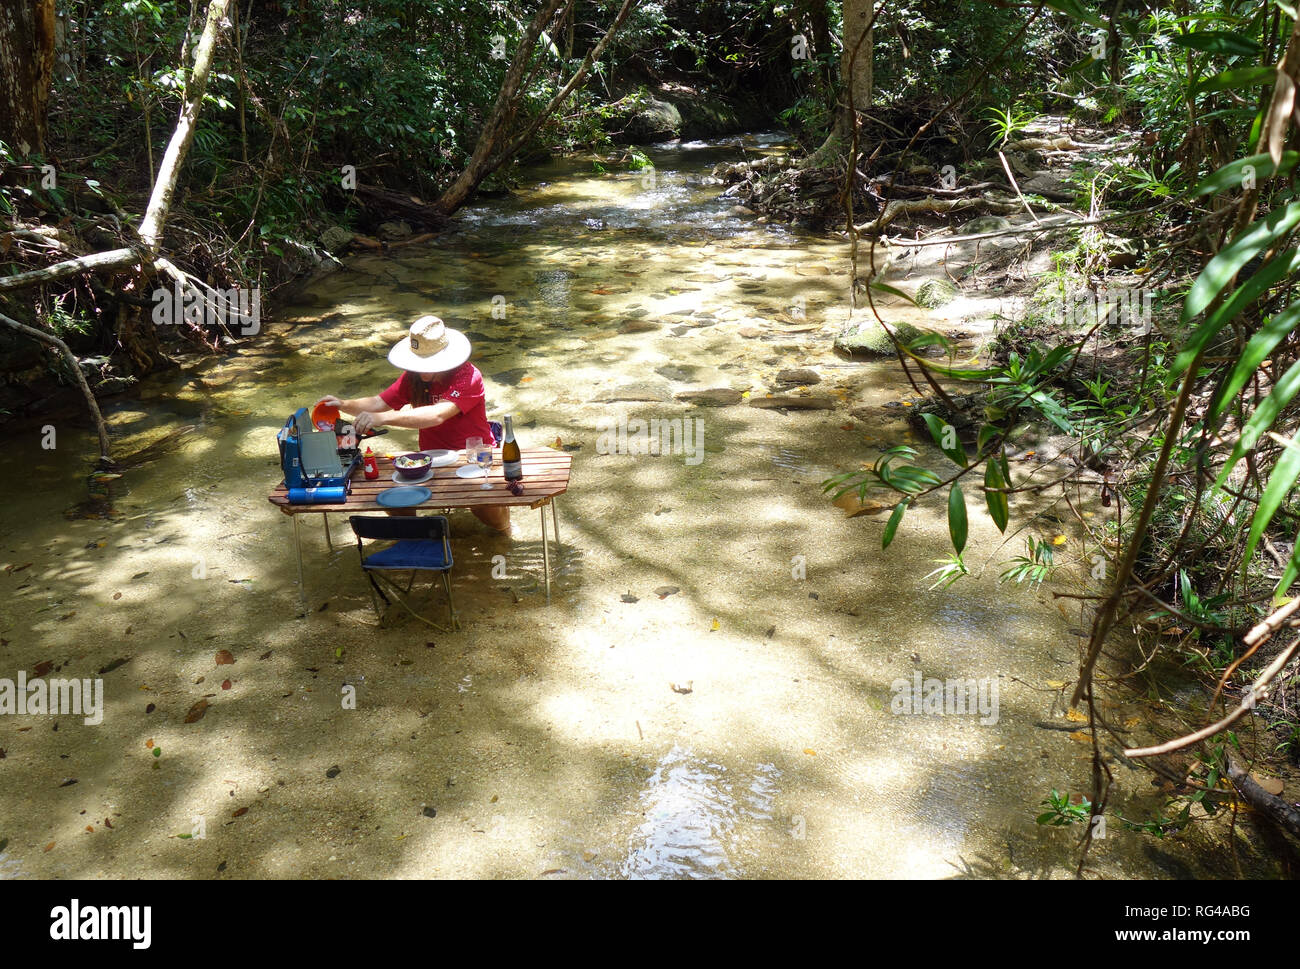 Man BBQing on picnic table set up in rainforest creek, Dinden National Park, near Cairns, Queensland, Australia. No MR or PR Stock Photo